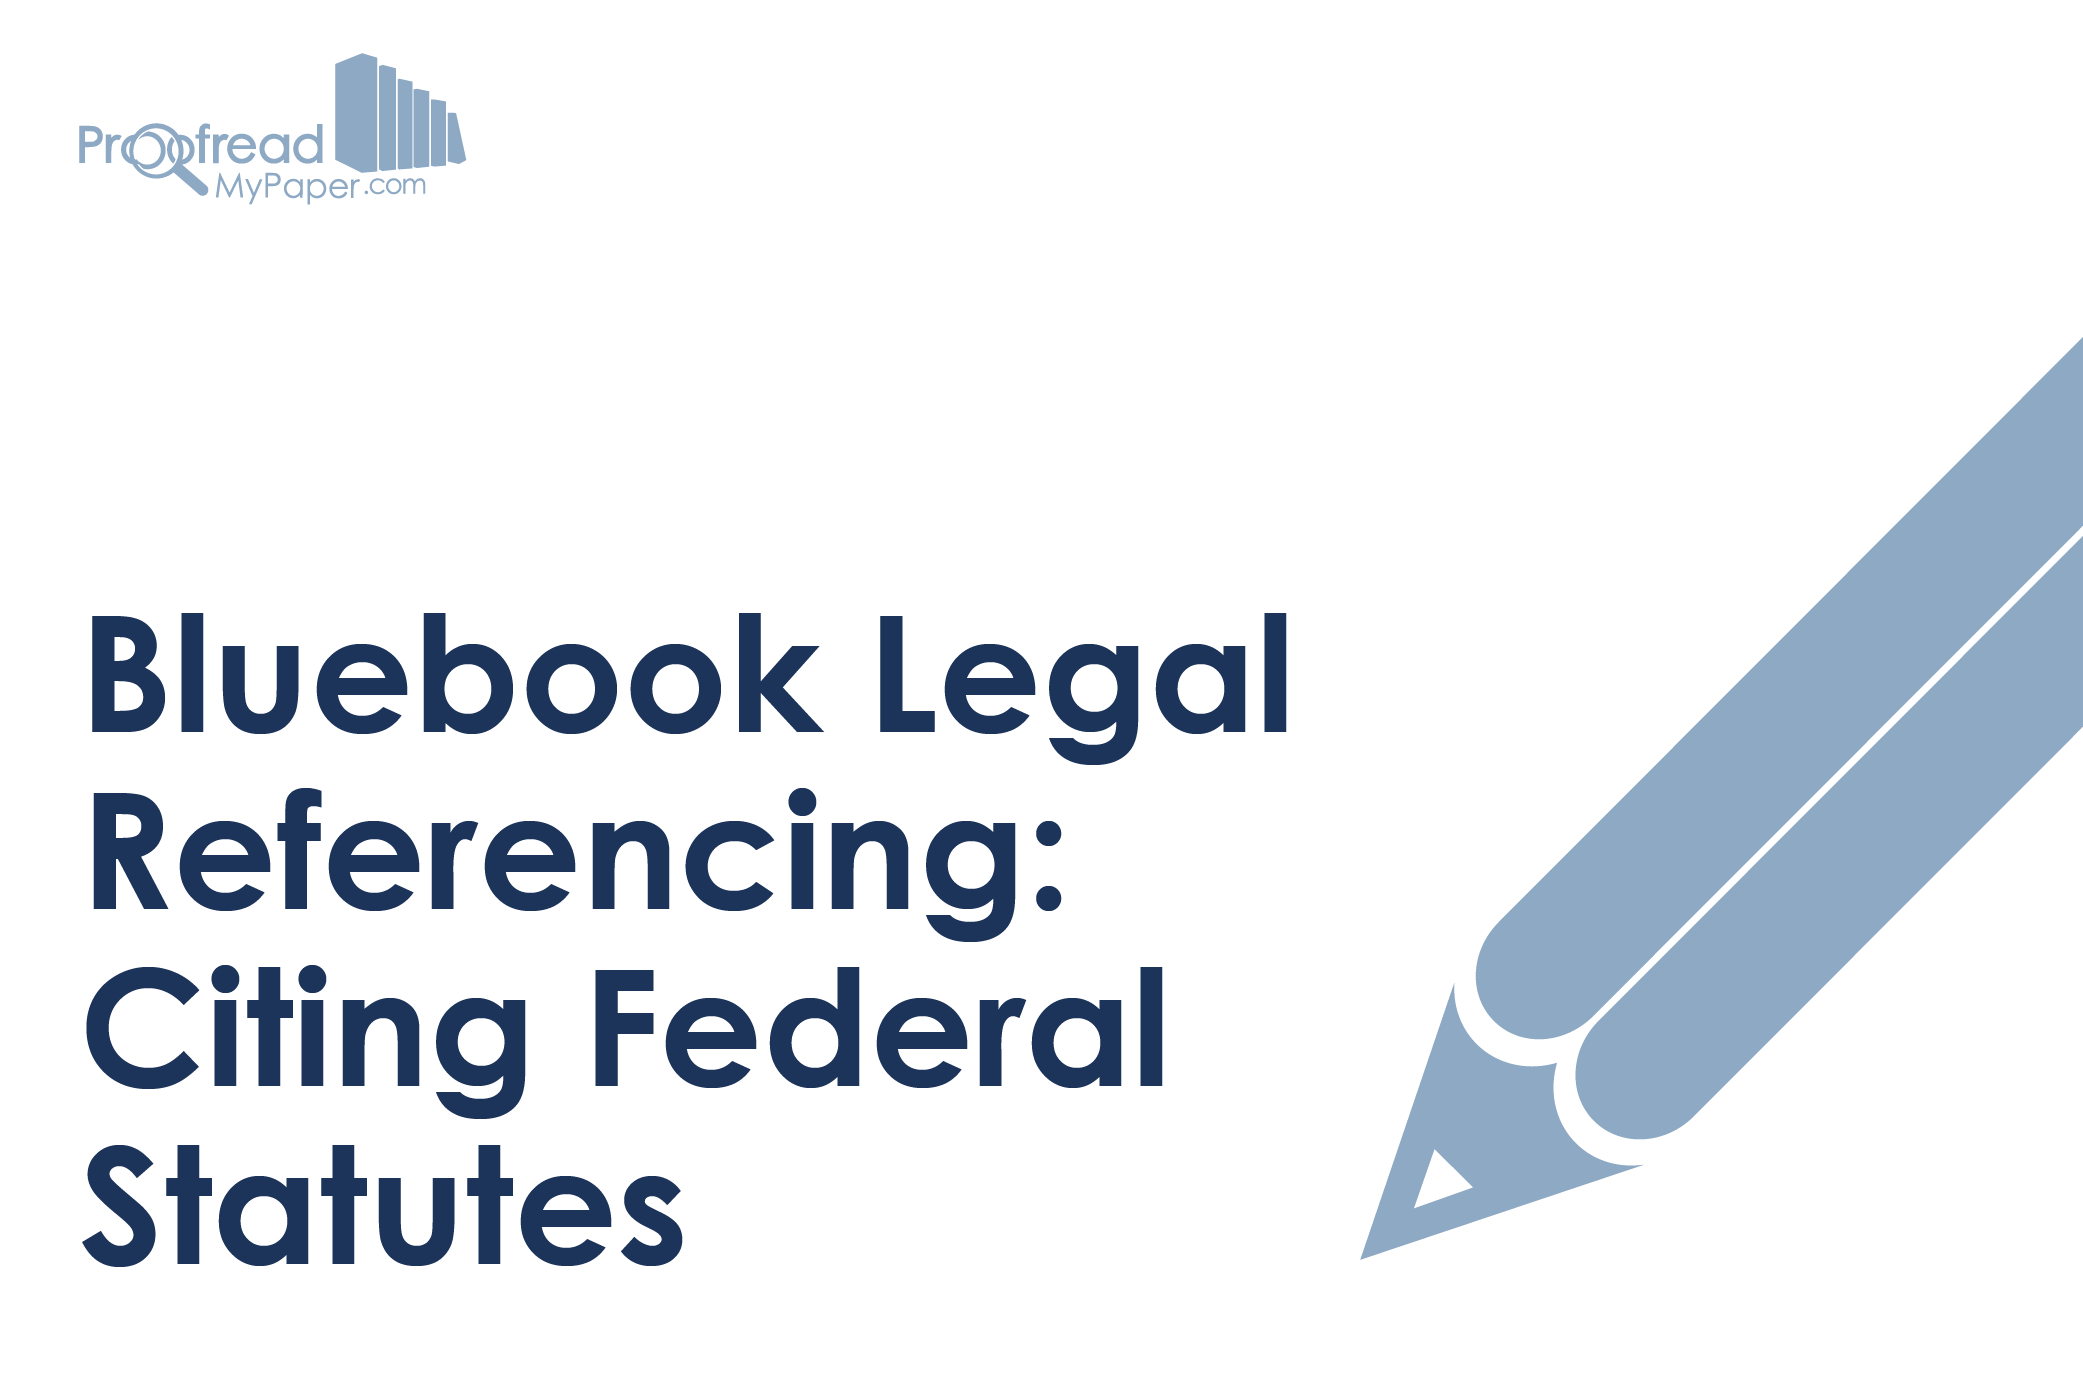 Bluebook Legal Referencing – Citing Federal Statutes